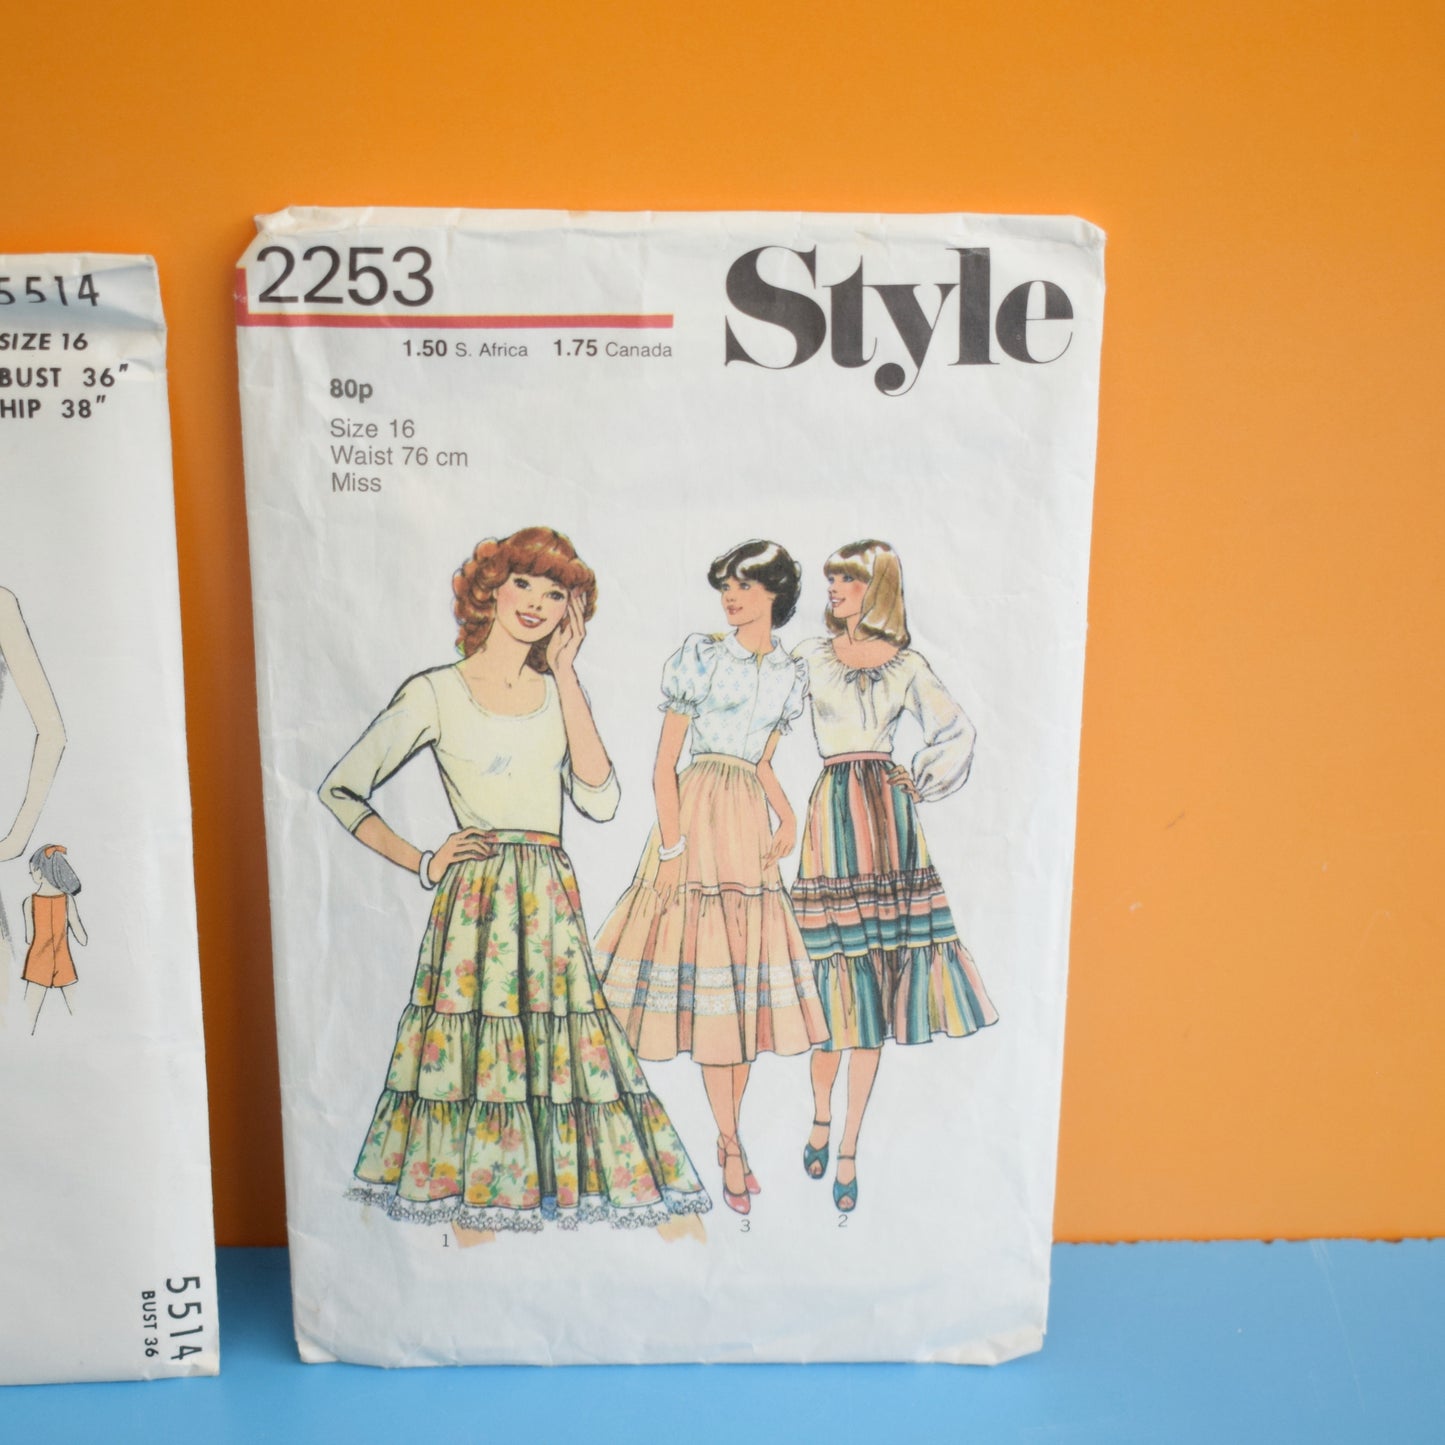 Vintage 1970s Catsuit/ Gypsy Skirt Patterns